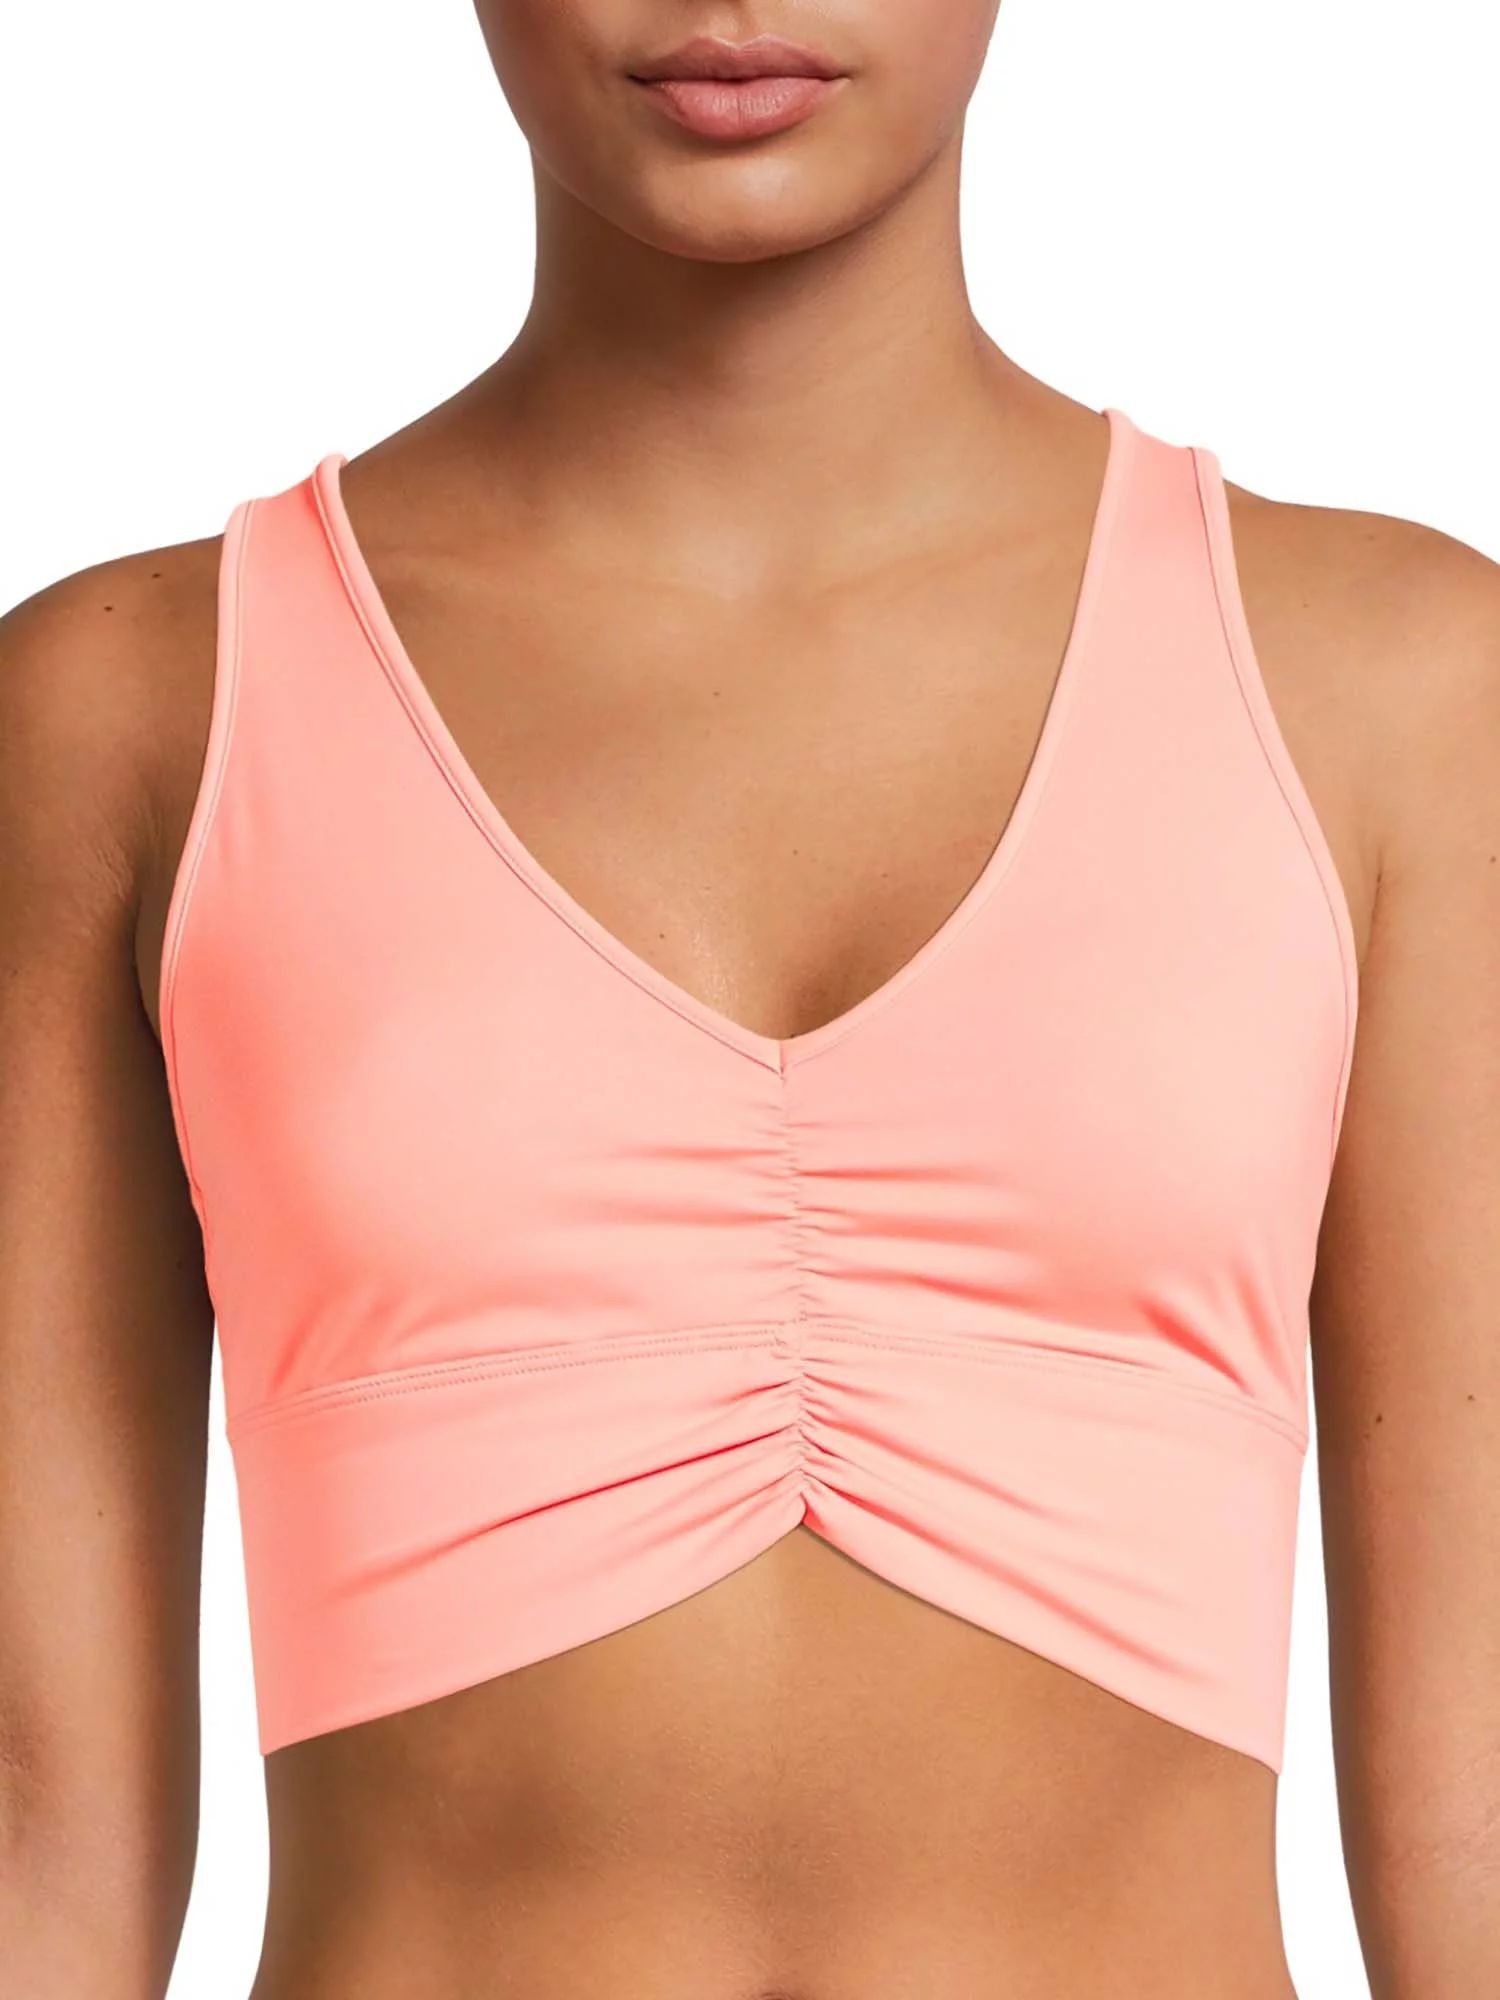 AviaAvia Women's Ruched V-Neck Sports BraUSD$14.98(4.7)4.7 stars out of 15 reviews15 reviewsPrice... | Walmart (US)